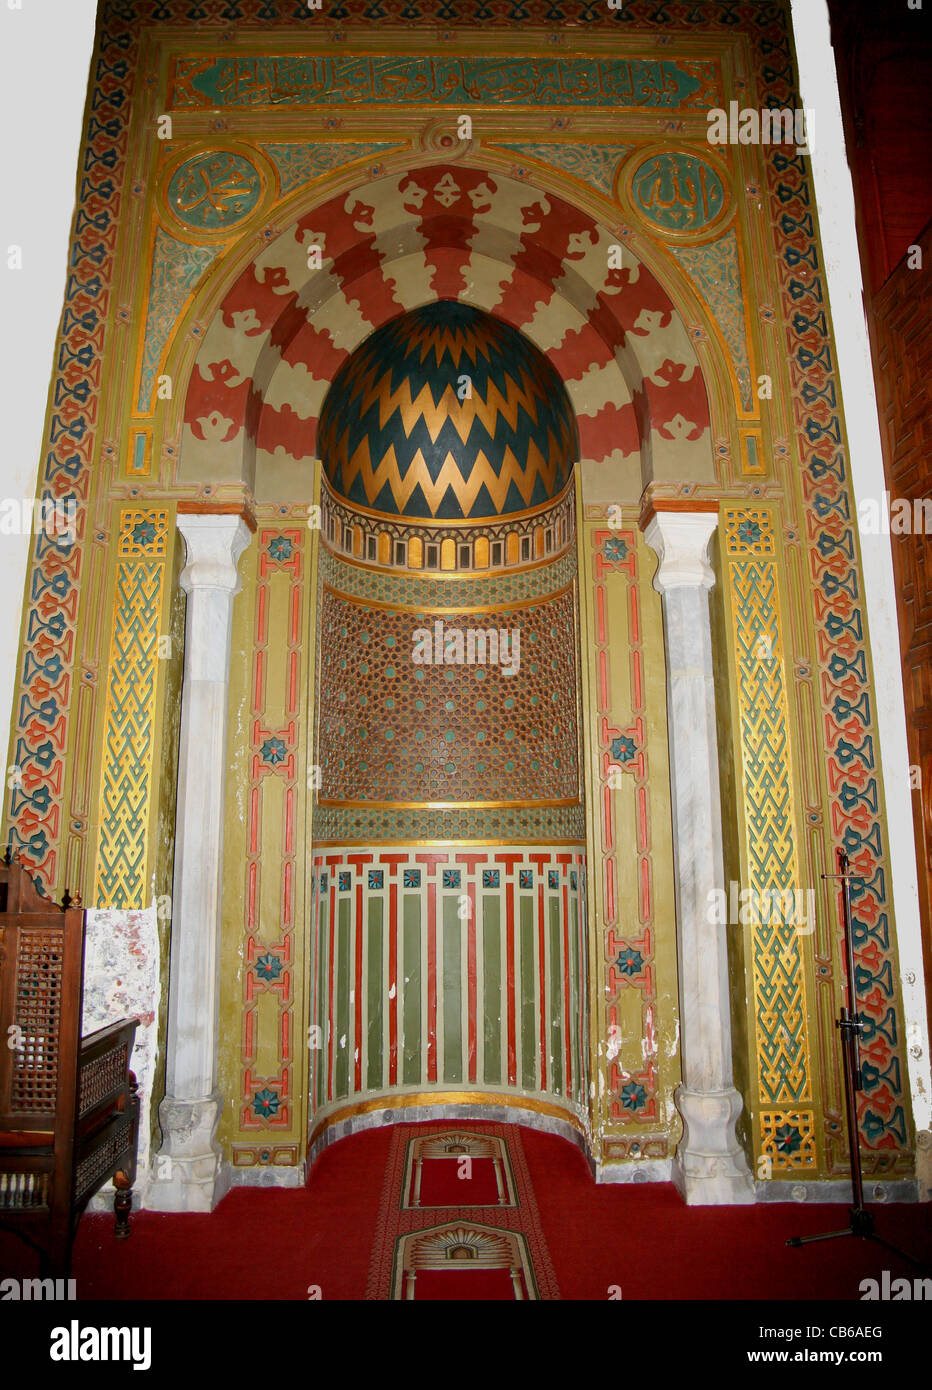 The mihrab in the Mosque of Amr, was originally built in 642 CE, as the center of the newly-founded capital of Egypt, Fustat (Cairo). Stock Photo